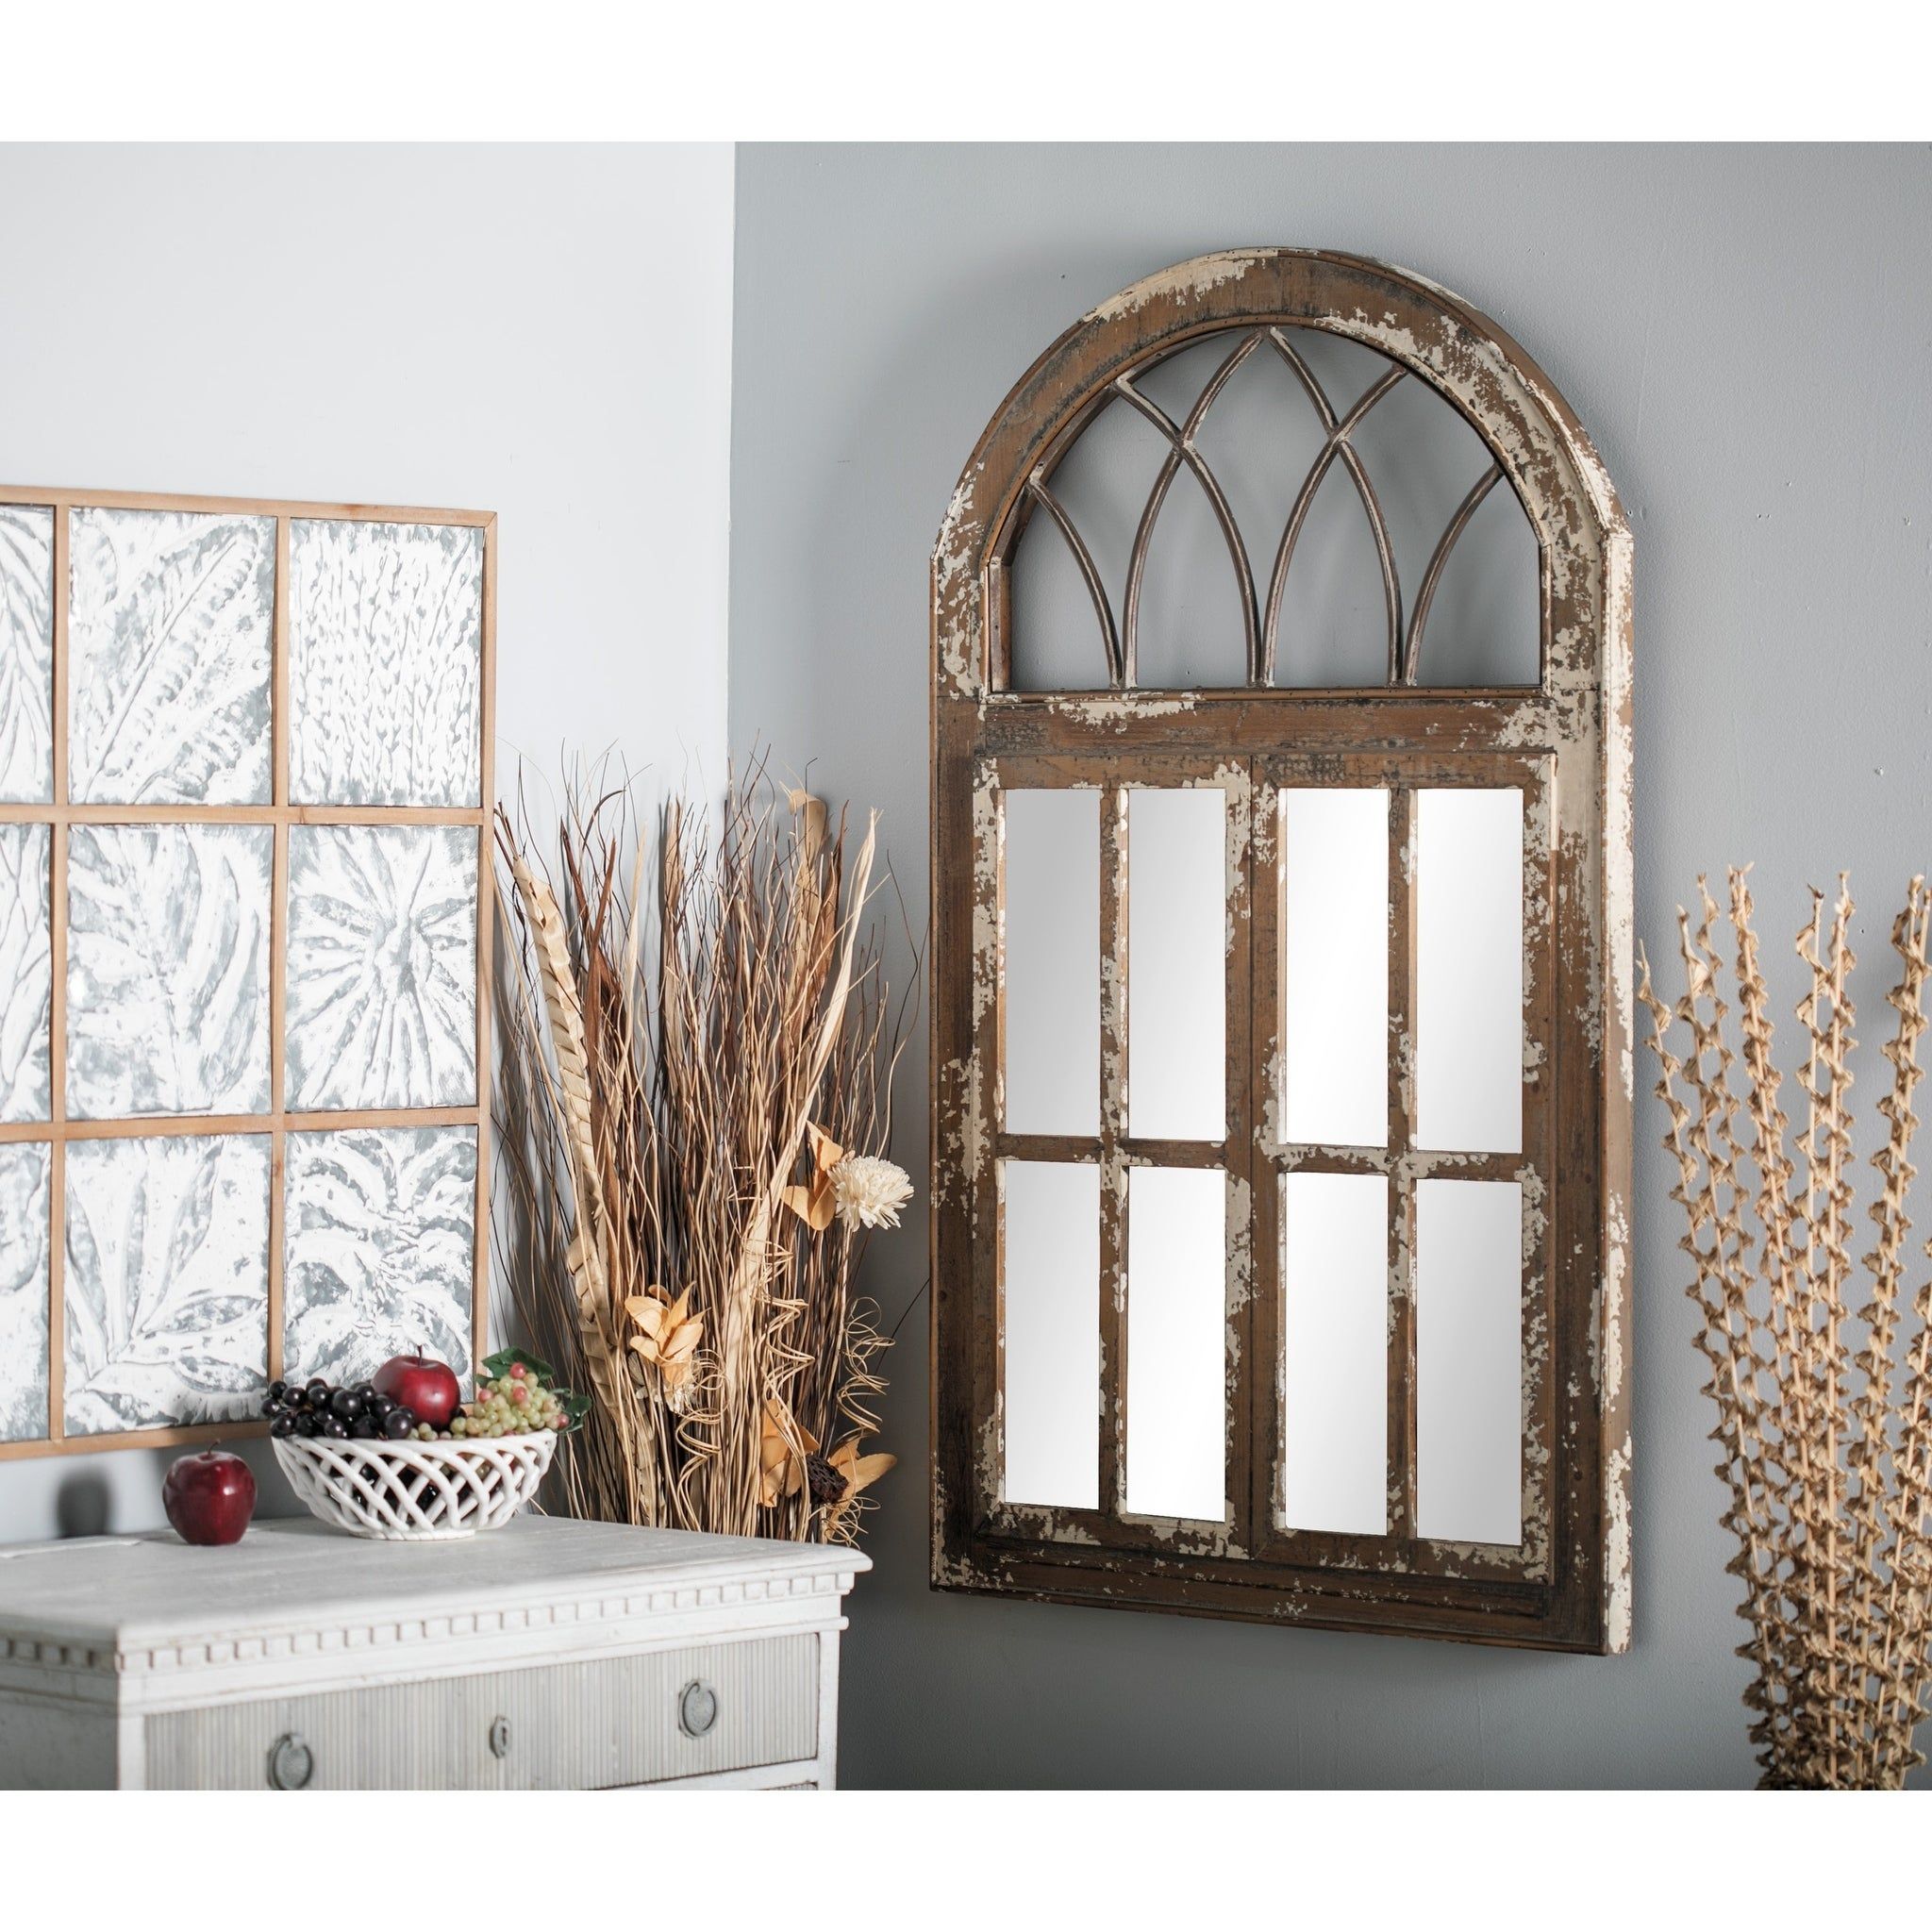 Shop Farmhouse 48 X 30 Inch Classic Brown Arched Wall Mirrorstudio Intended For Chestnut Brown Wall Mirrors (View 12 of 15)